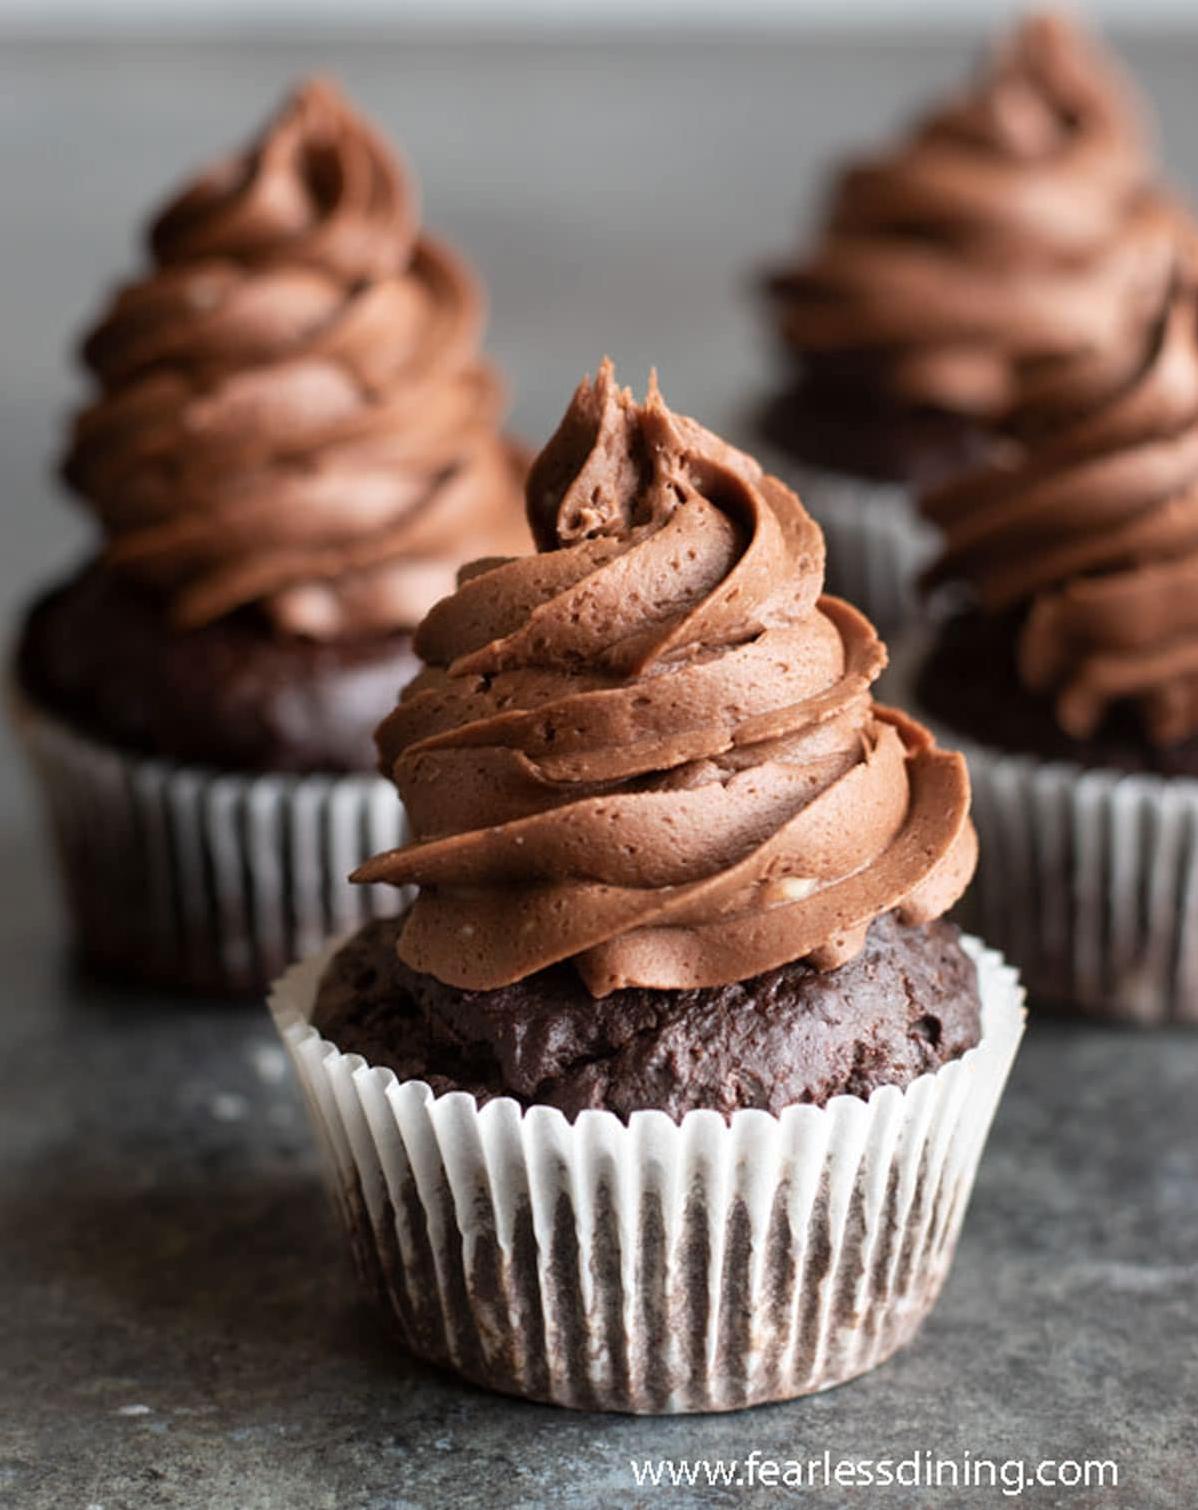  No gluten? No problem! These gluten-free fudge cupcakes have a rich flavor and texture that rival any traditional cupcake.